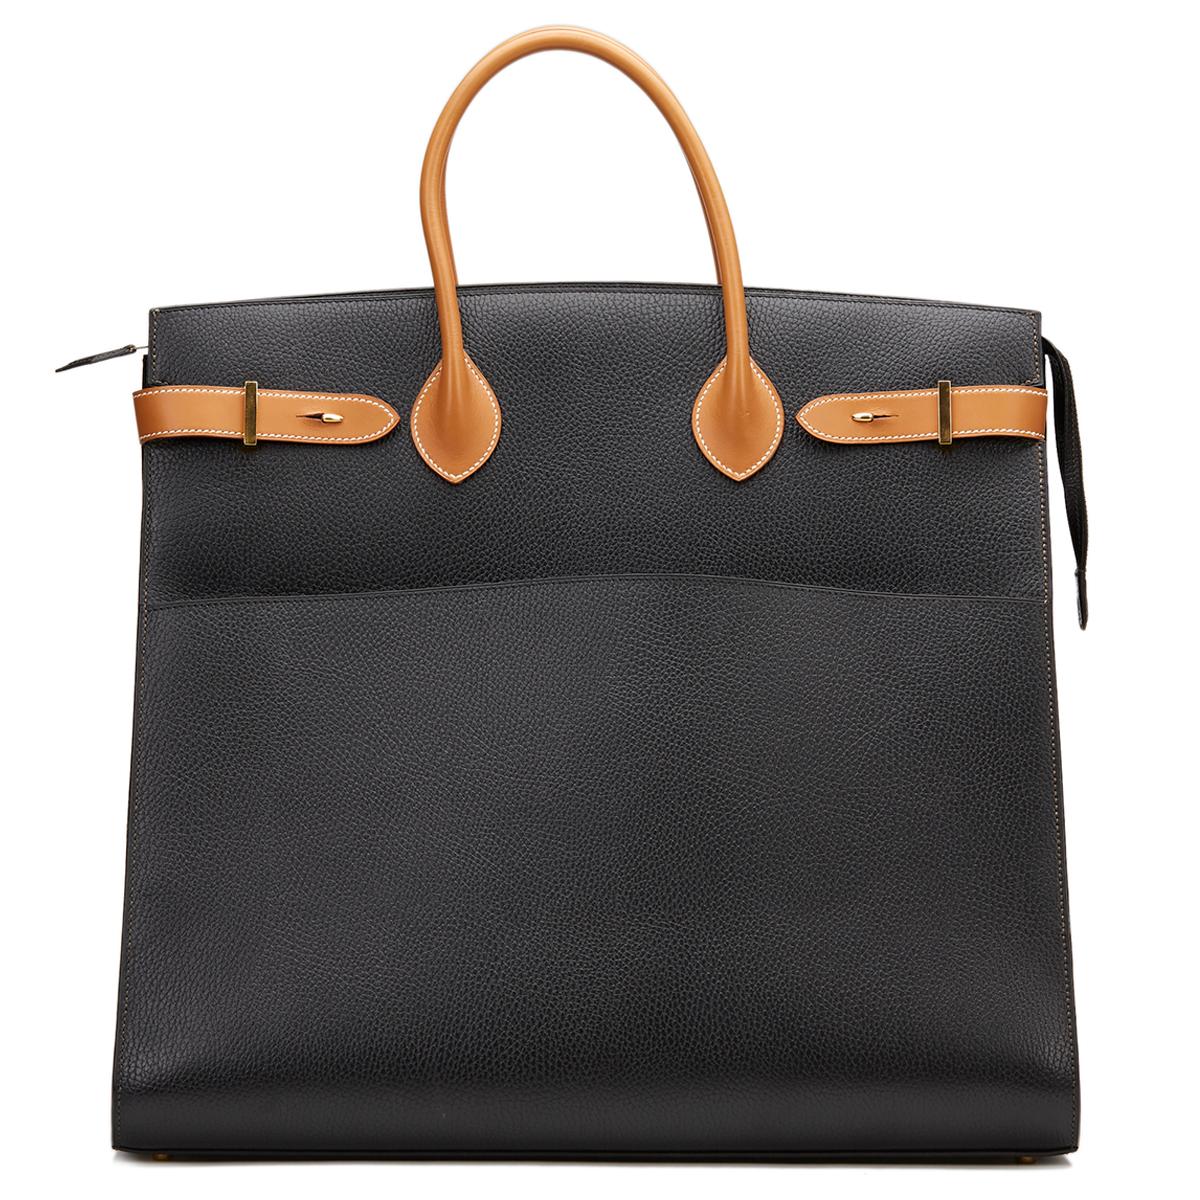 HERMÈS
Black Ardennes Leather & Barenia Leather Vintage Airport Bag

 Reference: HB876
Serial Number: (X)
Age (Circa): 1994
Accompanied By: Hermès Dust Bag
Authenticity Details: Date Stamp (Made in France)
Gender: Unisex
Type: Travel, Tote

Colour: